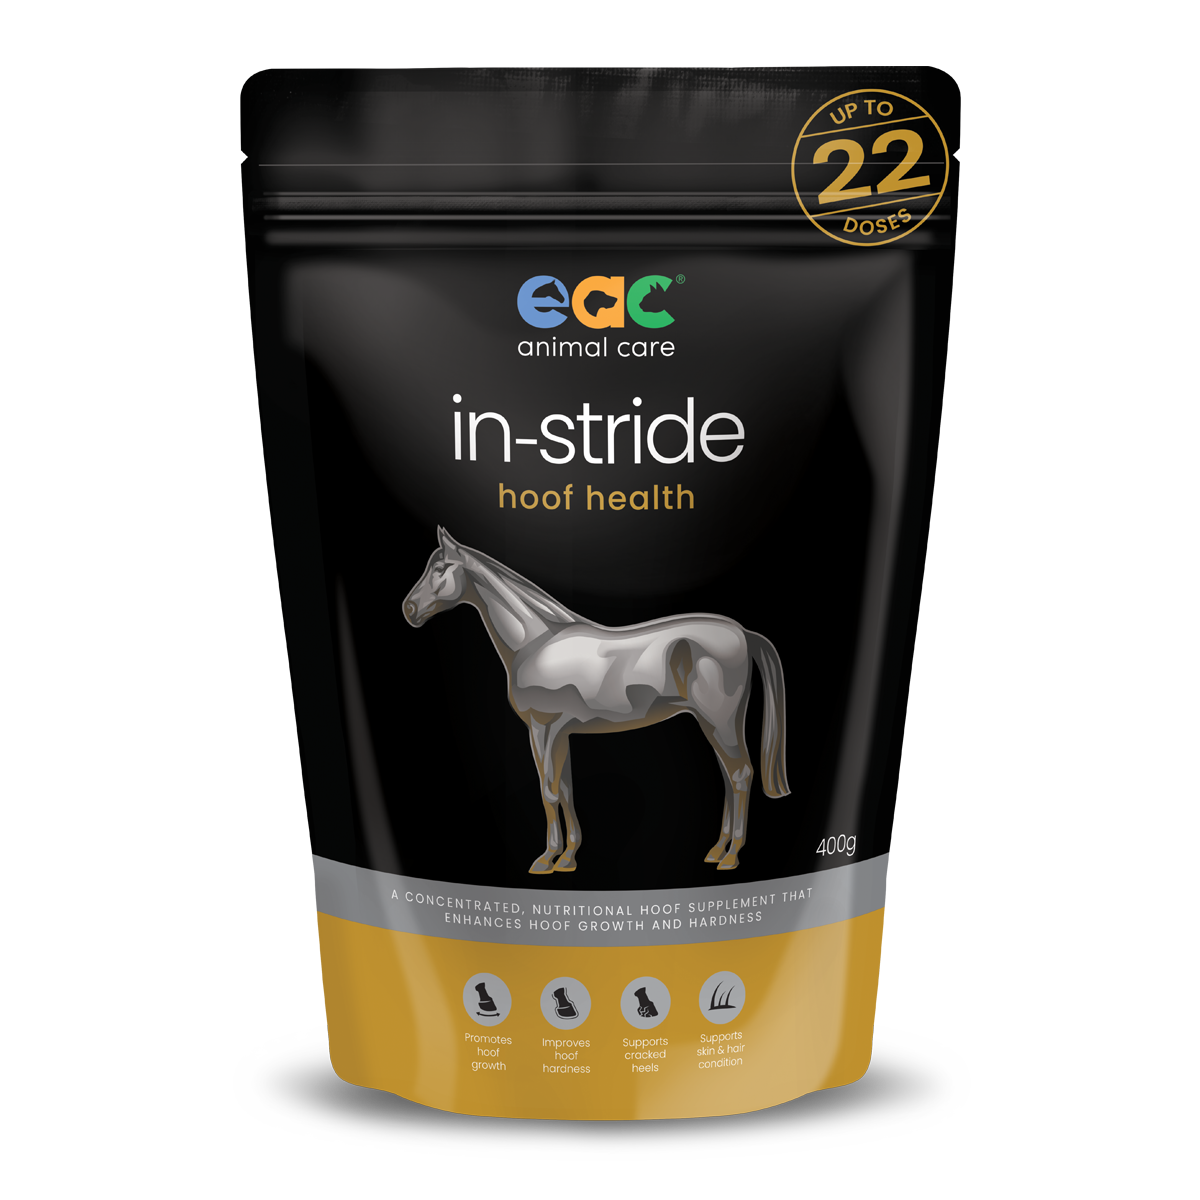 A black package of EAC Animal Care's 'in-stride hoof health' supplement for horses, stating up to 22 doses, with a silver horse illustration and product benefits.